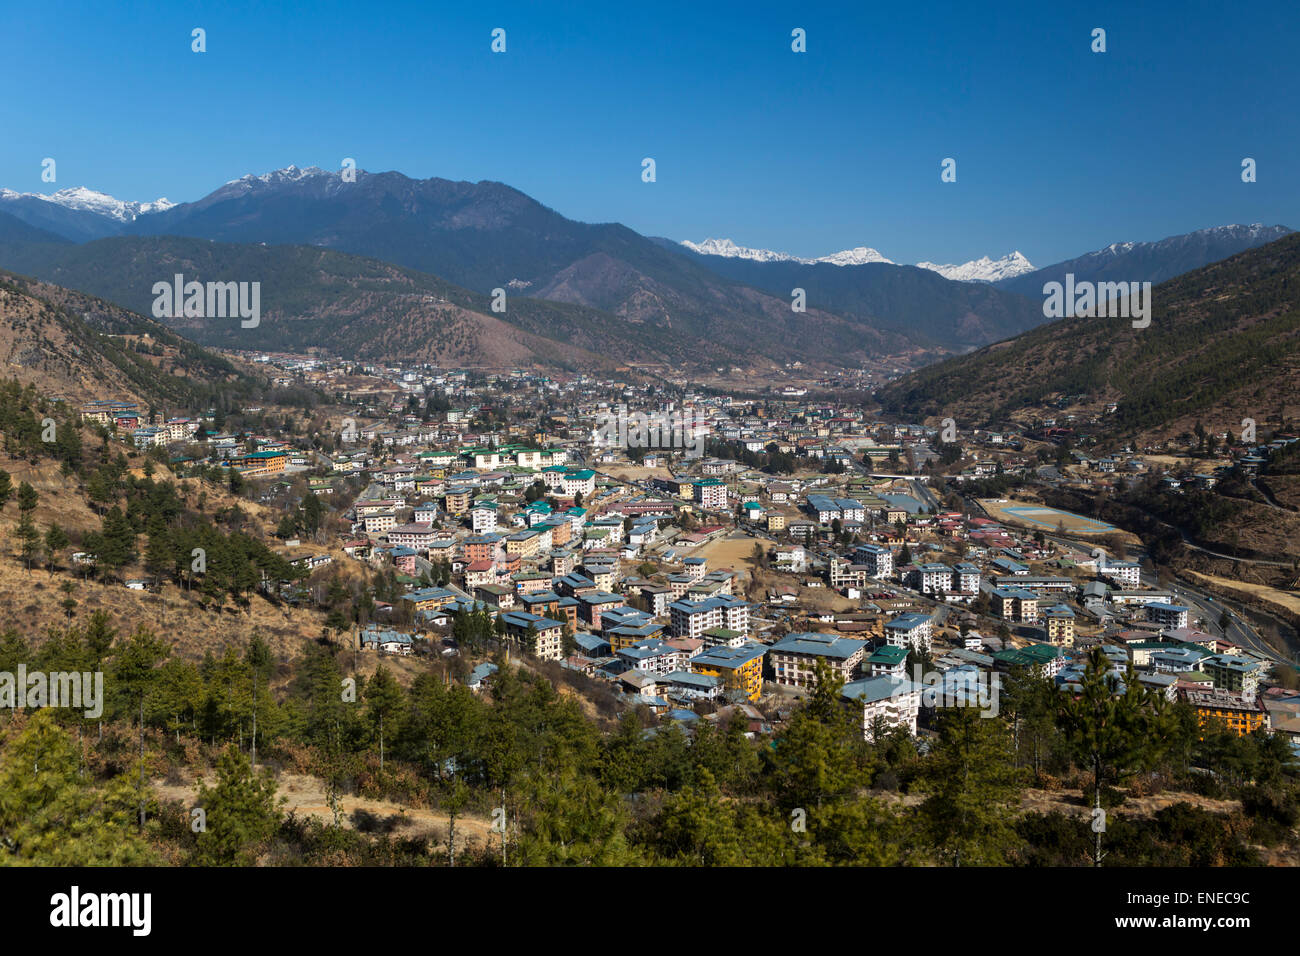 Overall view of Thimphu, Bhutan, Asia, from Buddha Dordenma, with mountains Stock Photo